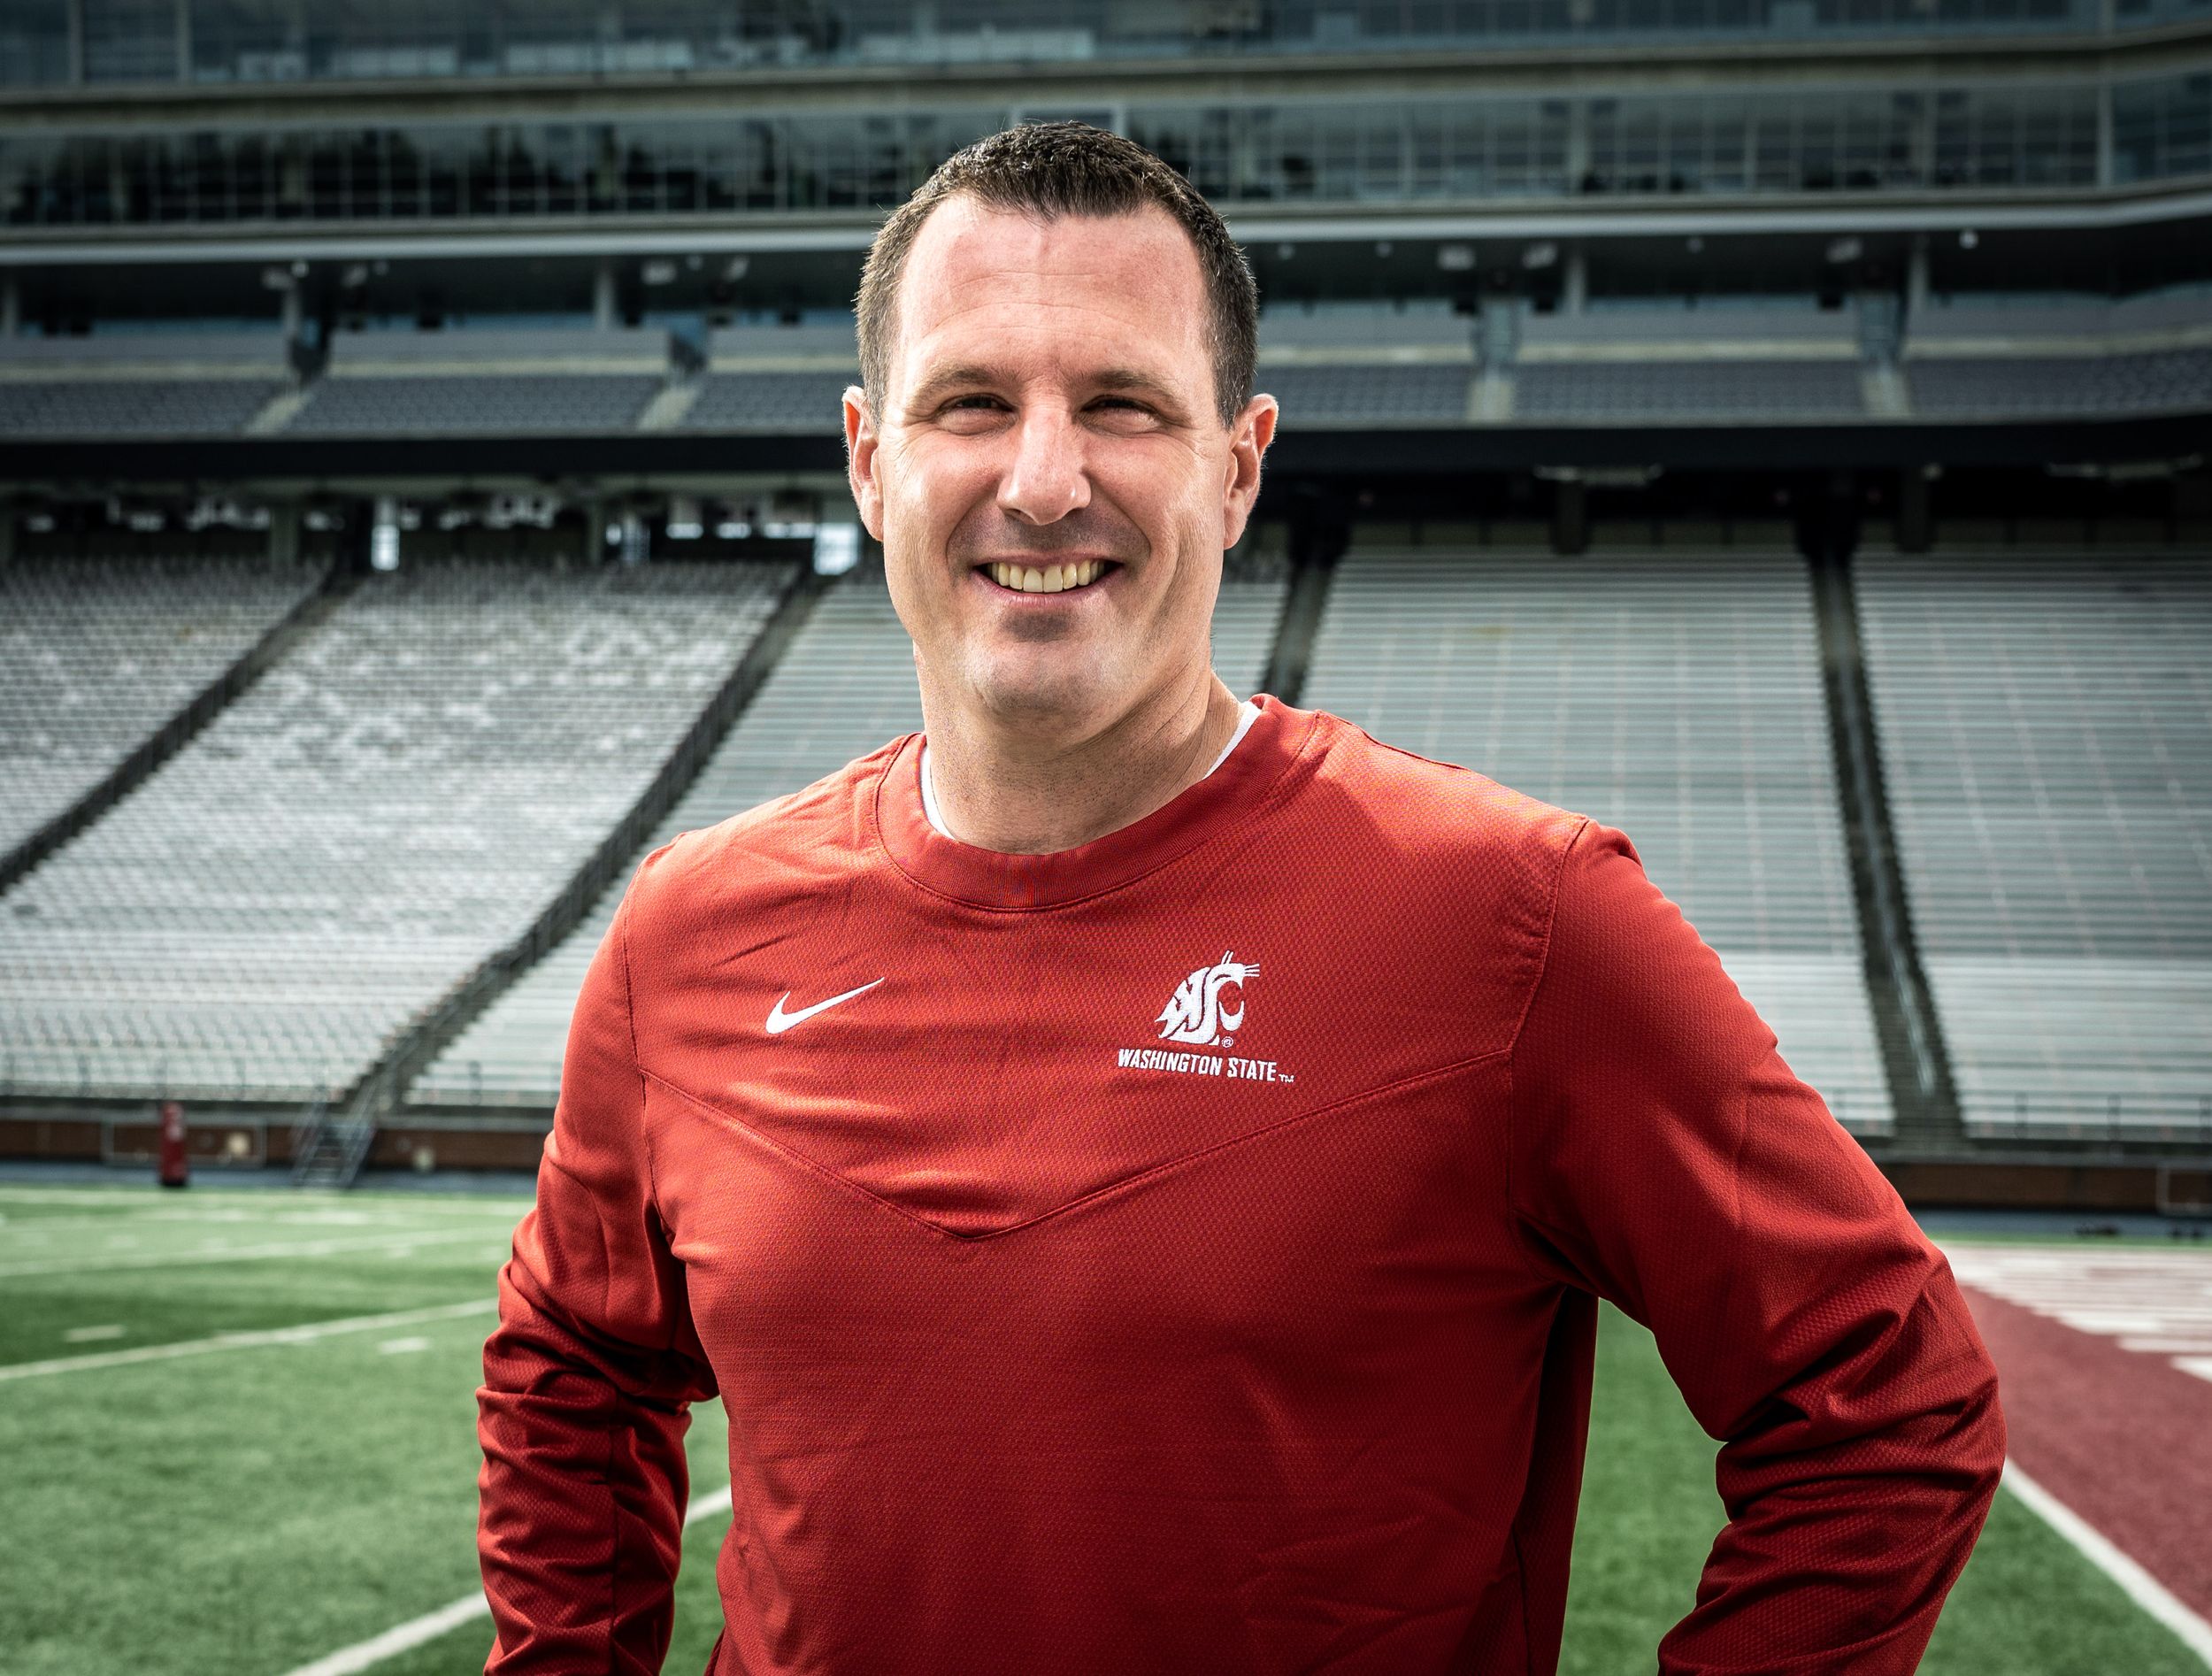 It's gonna be a great moment and a great challenge going back there':  Washington State coach Jake Dickert, a Wisconsin native, returns to the  state that shaped him | The Spokesman-Review